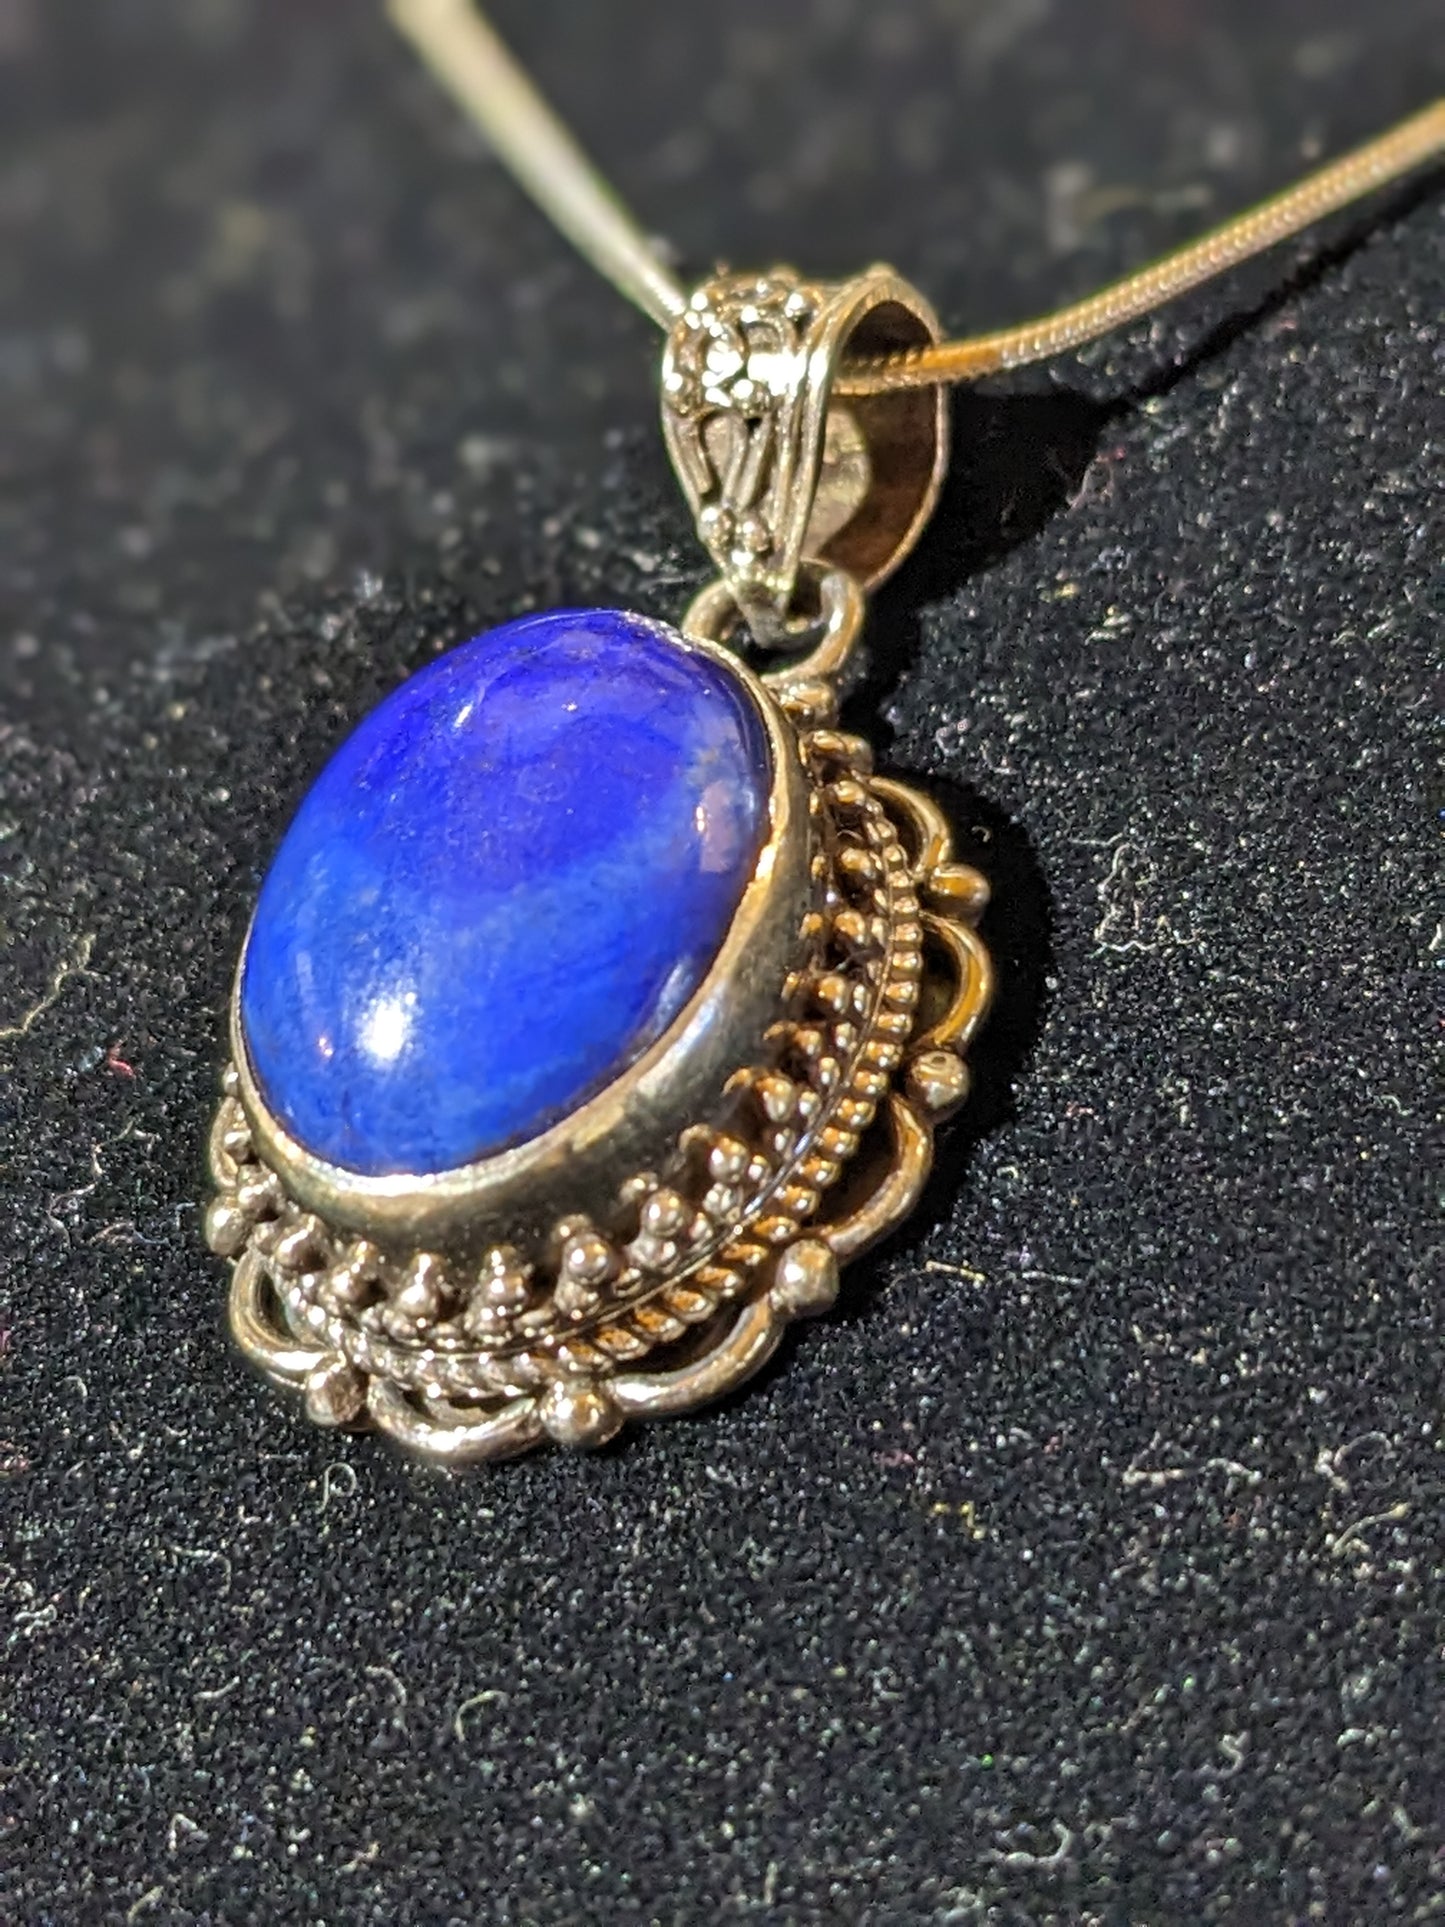 Sterling Silver Pendant With Lapis Lazuli